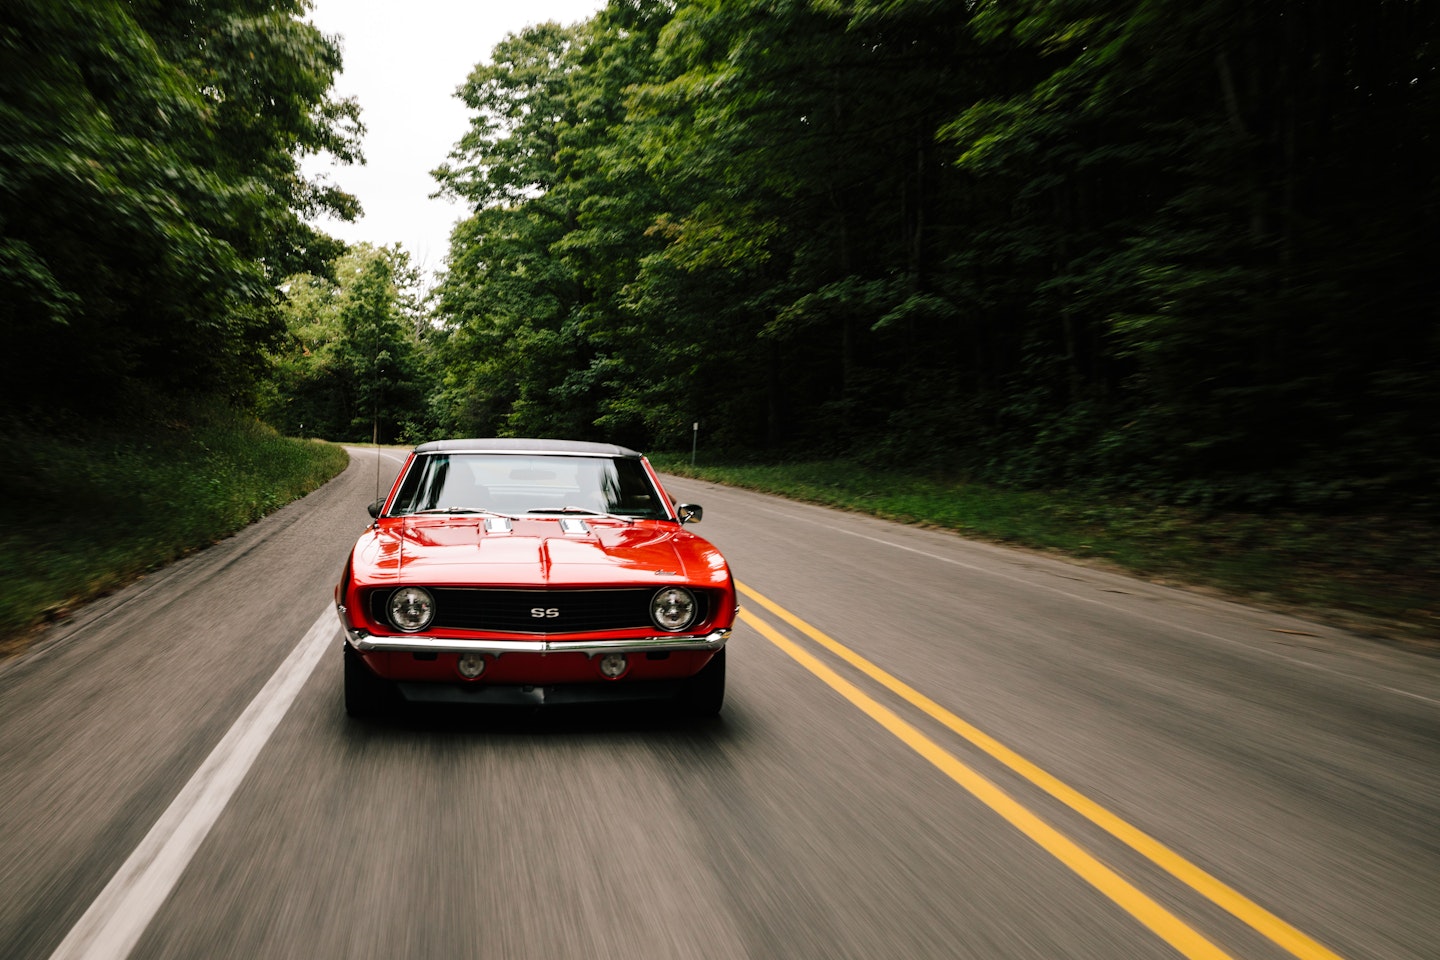 A red vintage Camero driving on a road through the woods